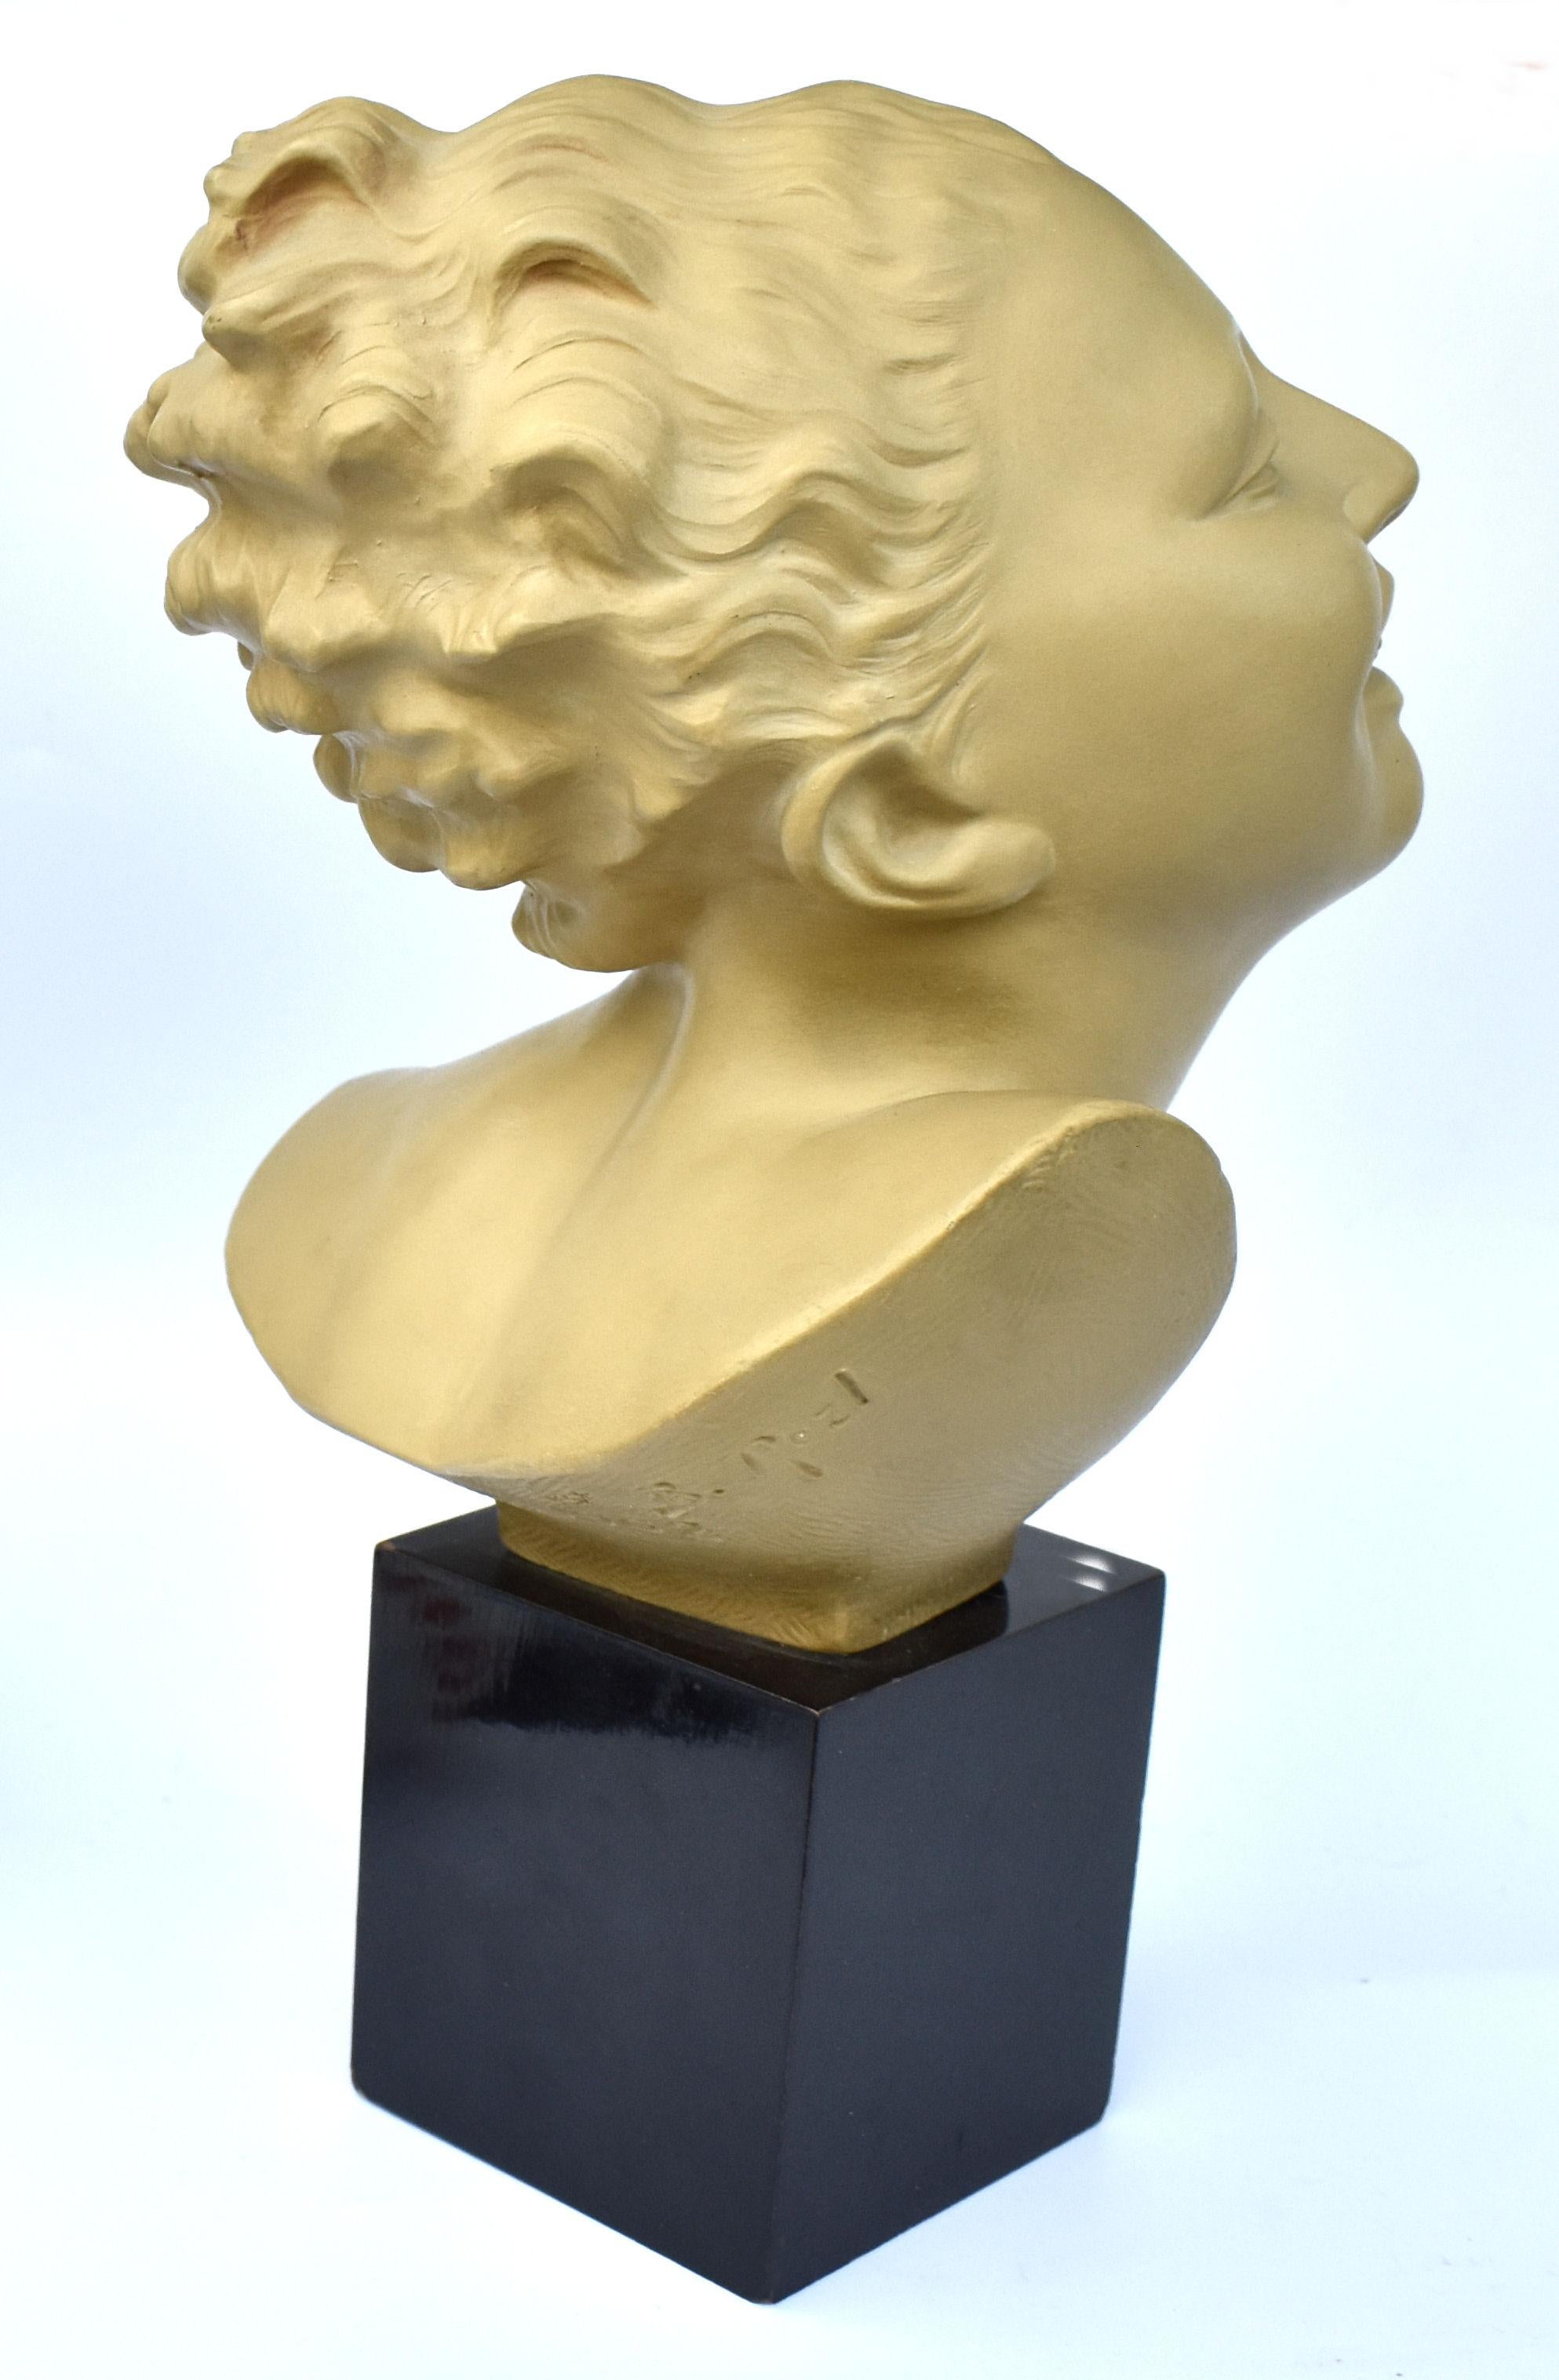 French Art Deco Bust On Stand, c1930 By Bohumil Rezl For Sale